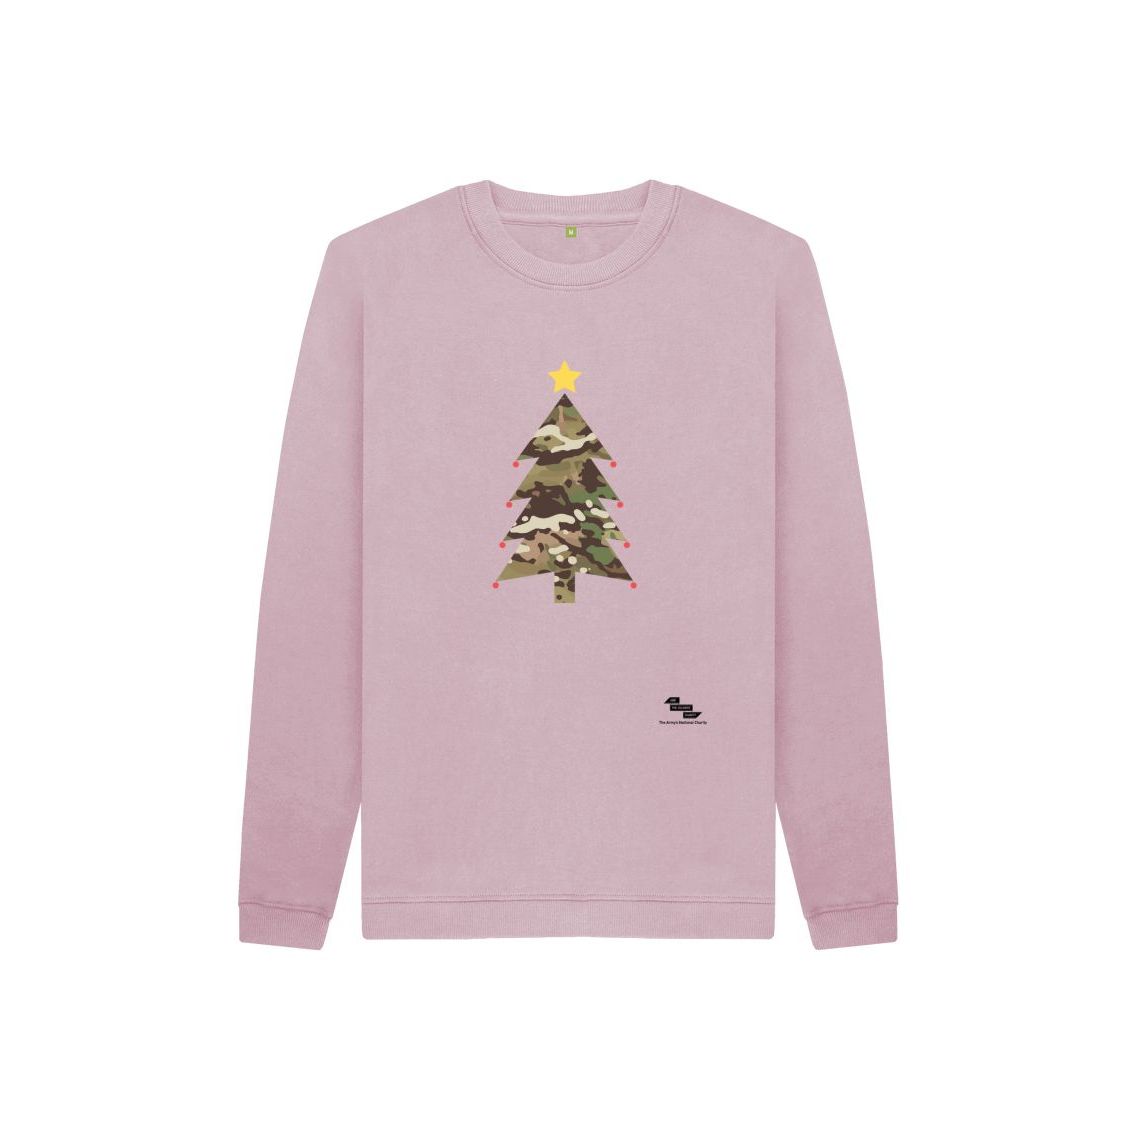 Kids camouflage Christmas jumper - ABF The Soldiers' Charity Shop